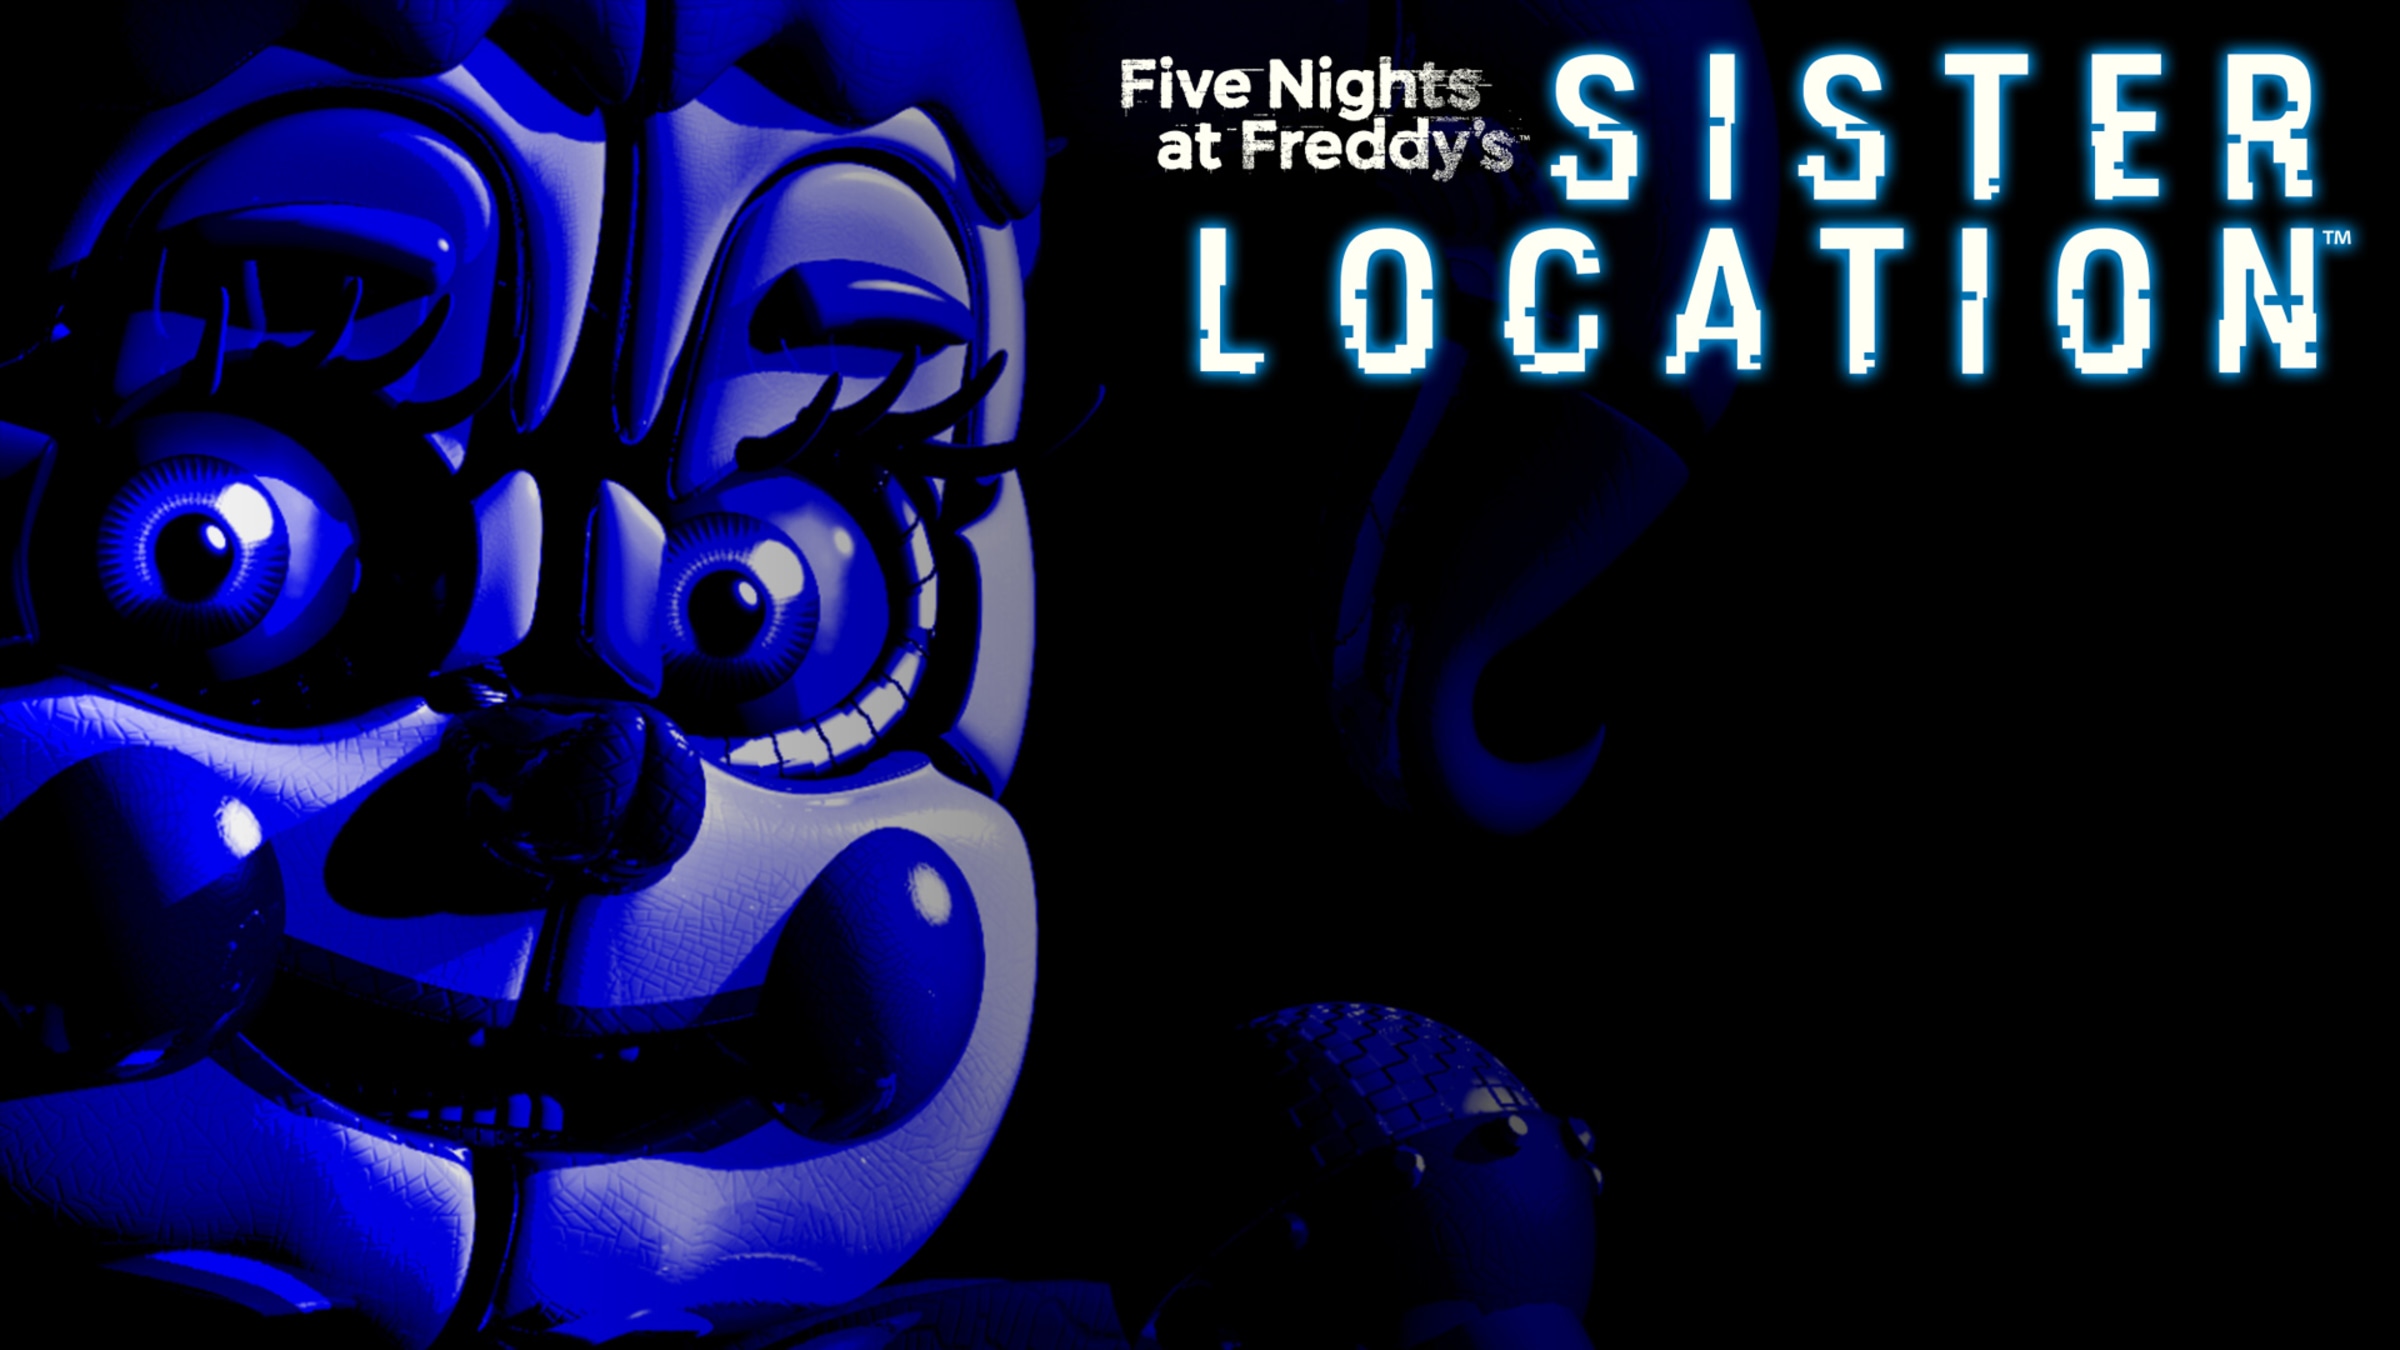 Locations-Five nights at freddy's 1